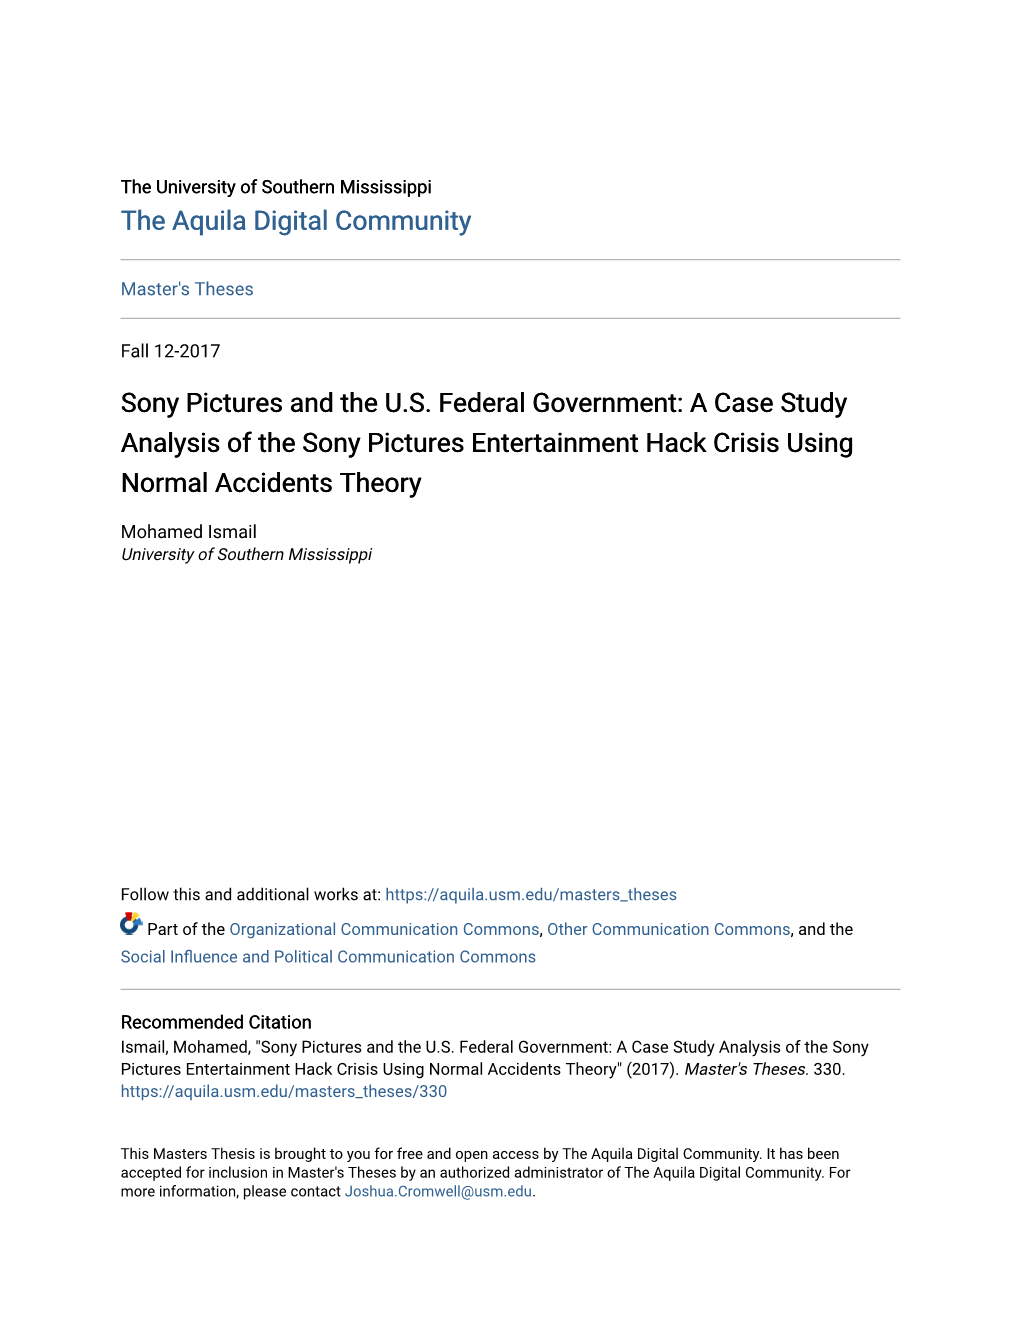 sony pictures entertainment hack case study